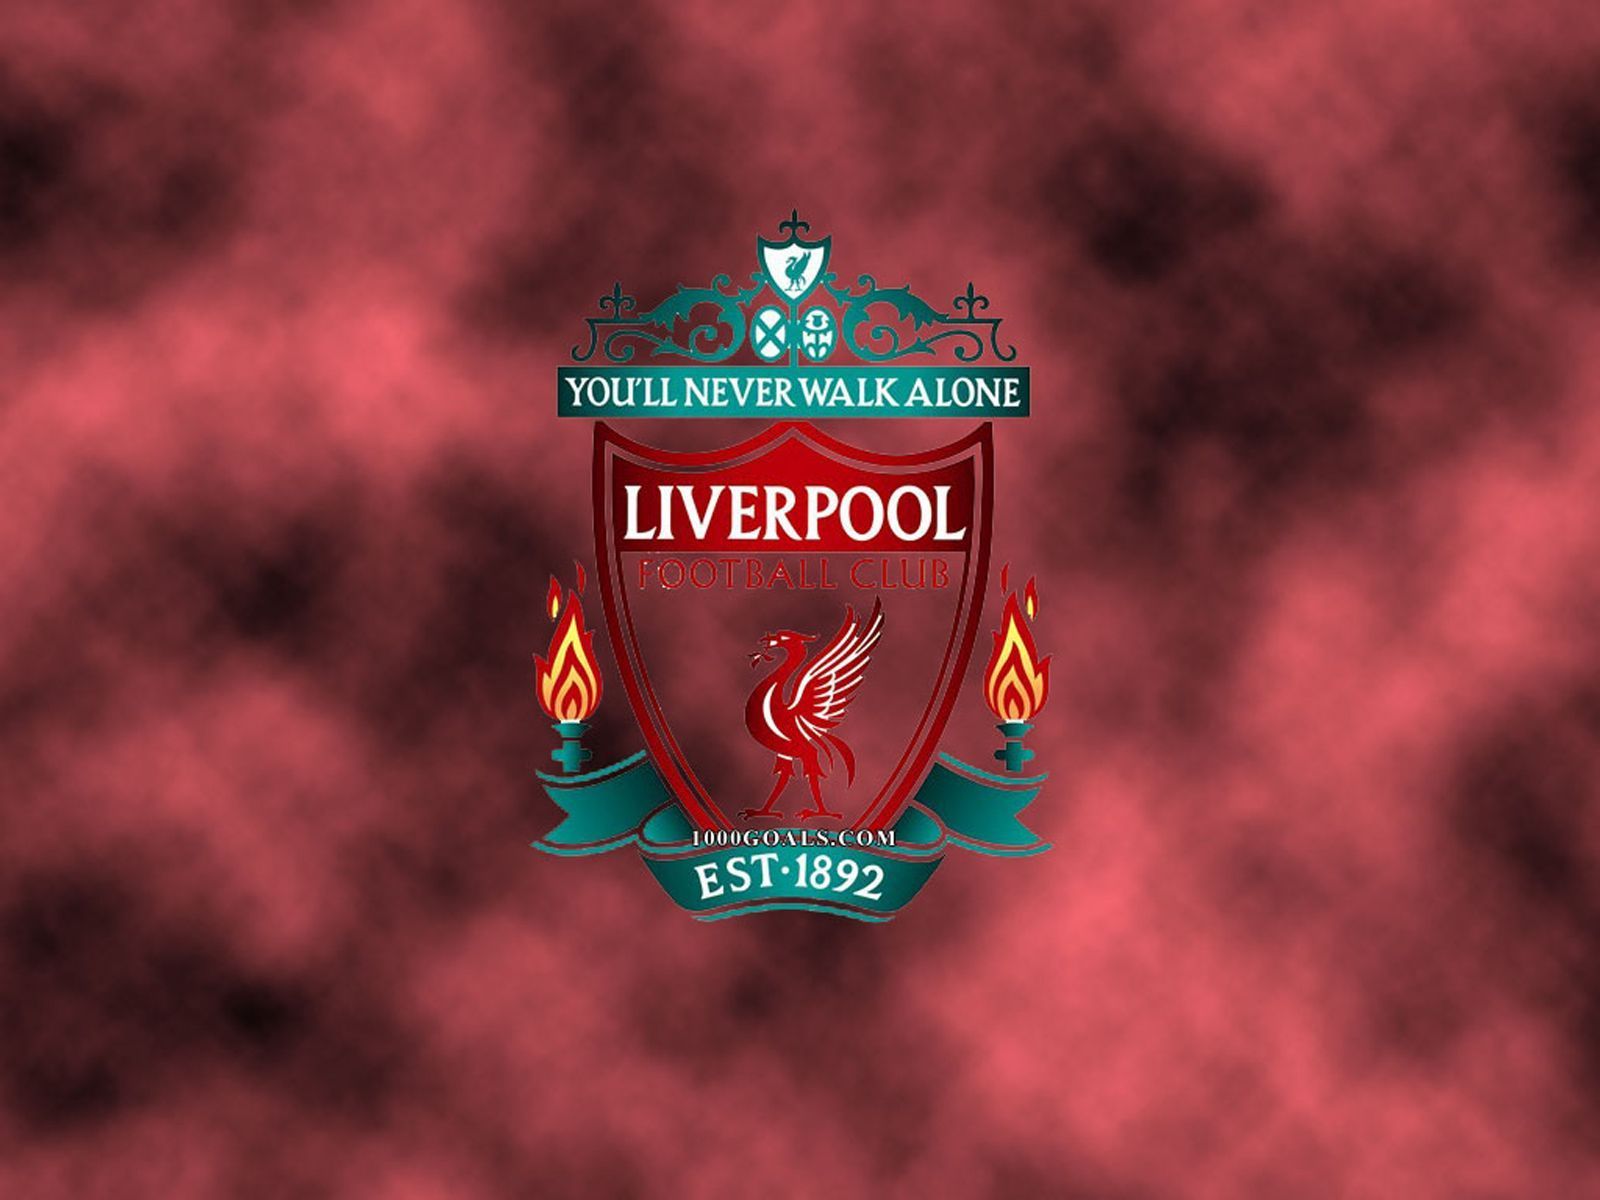 Liverpool Fc Wallpaper - HD Wallpapers Lovely